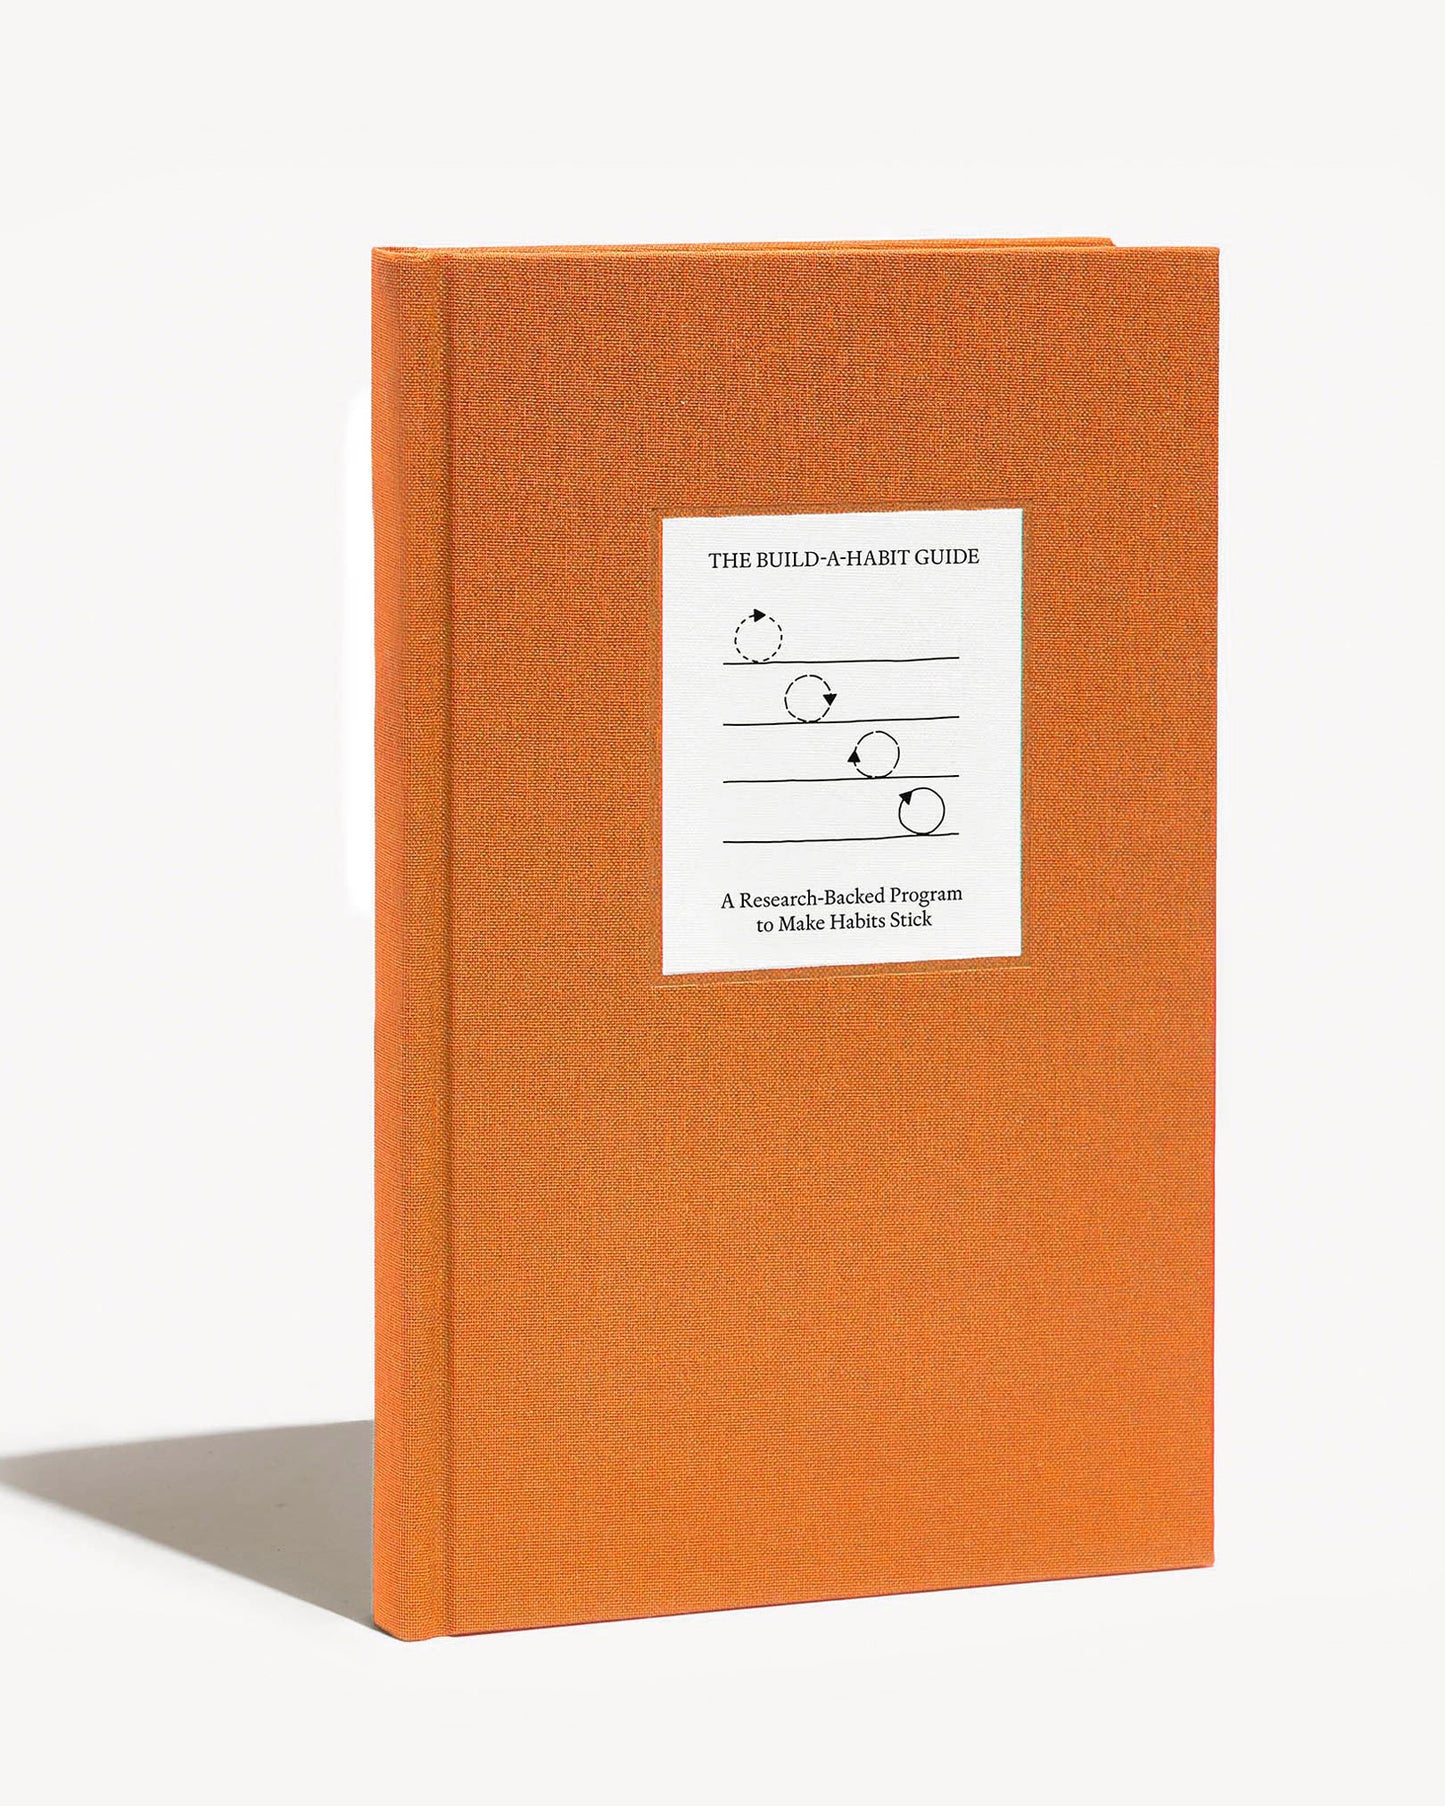 THERAPY NOTEBOOKS The Build-a-Habit Guide available at Lahn.shop